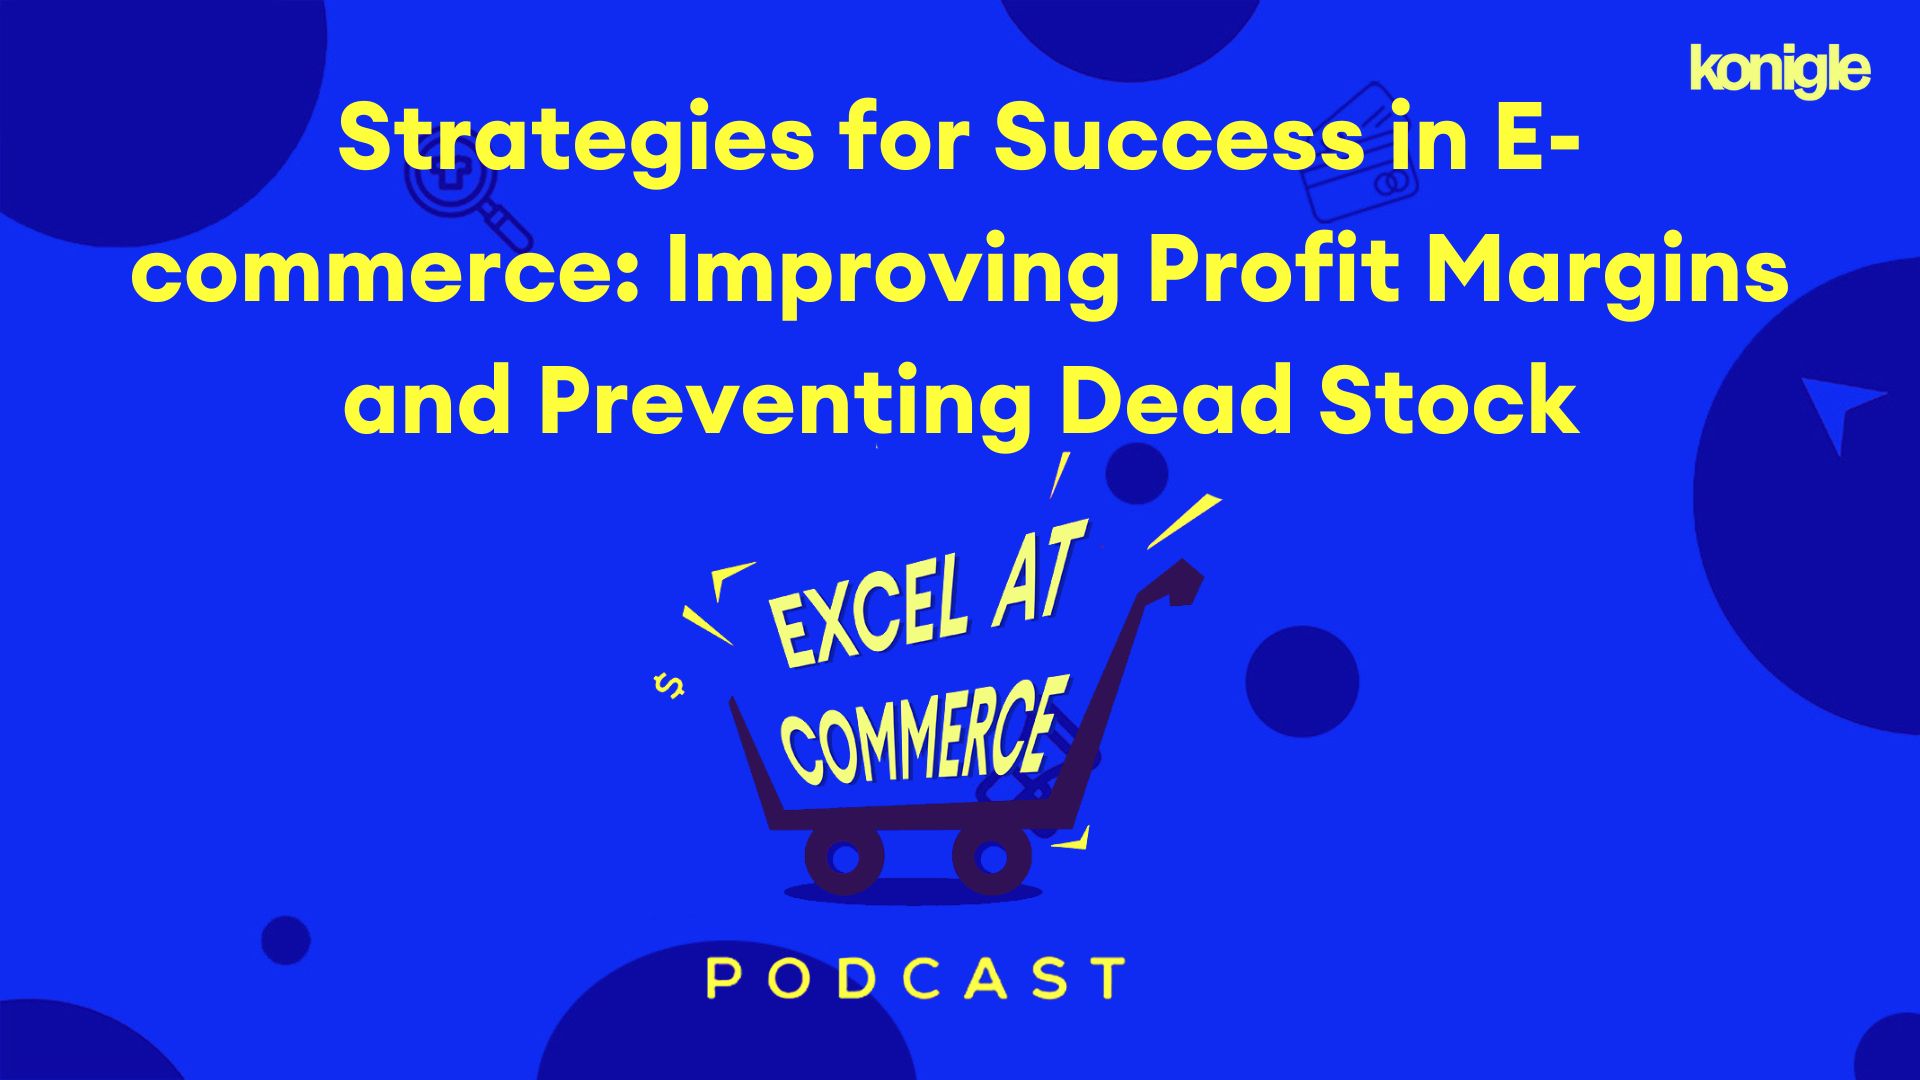 Strategies for Success in E-commerce: Improving Profit Margins and Preventing Dead Stock